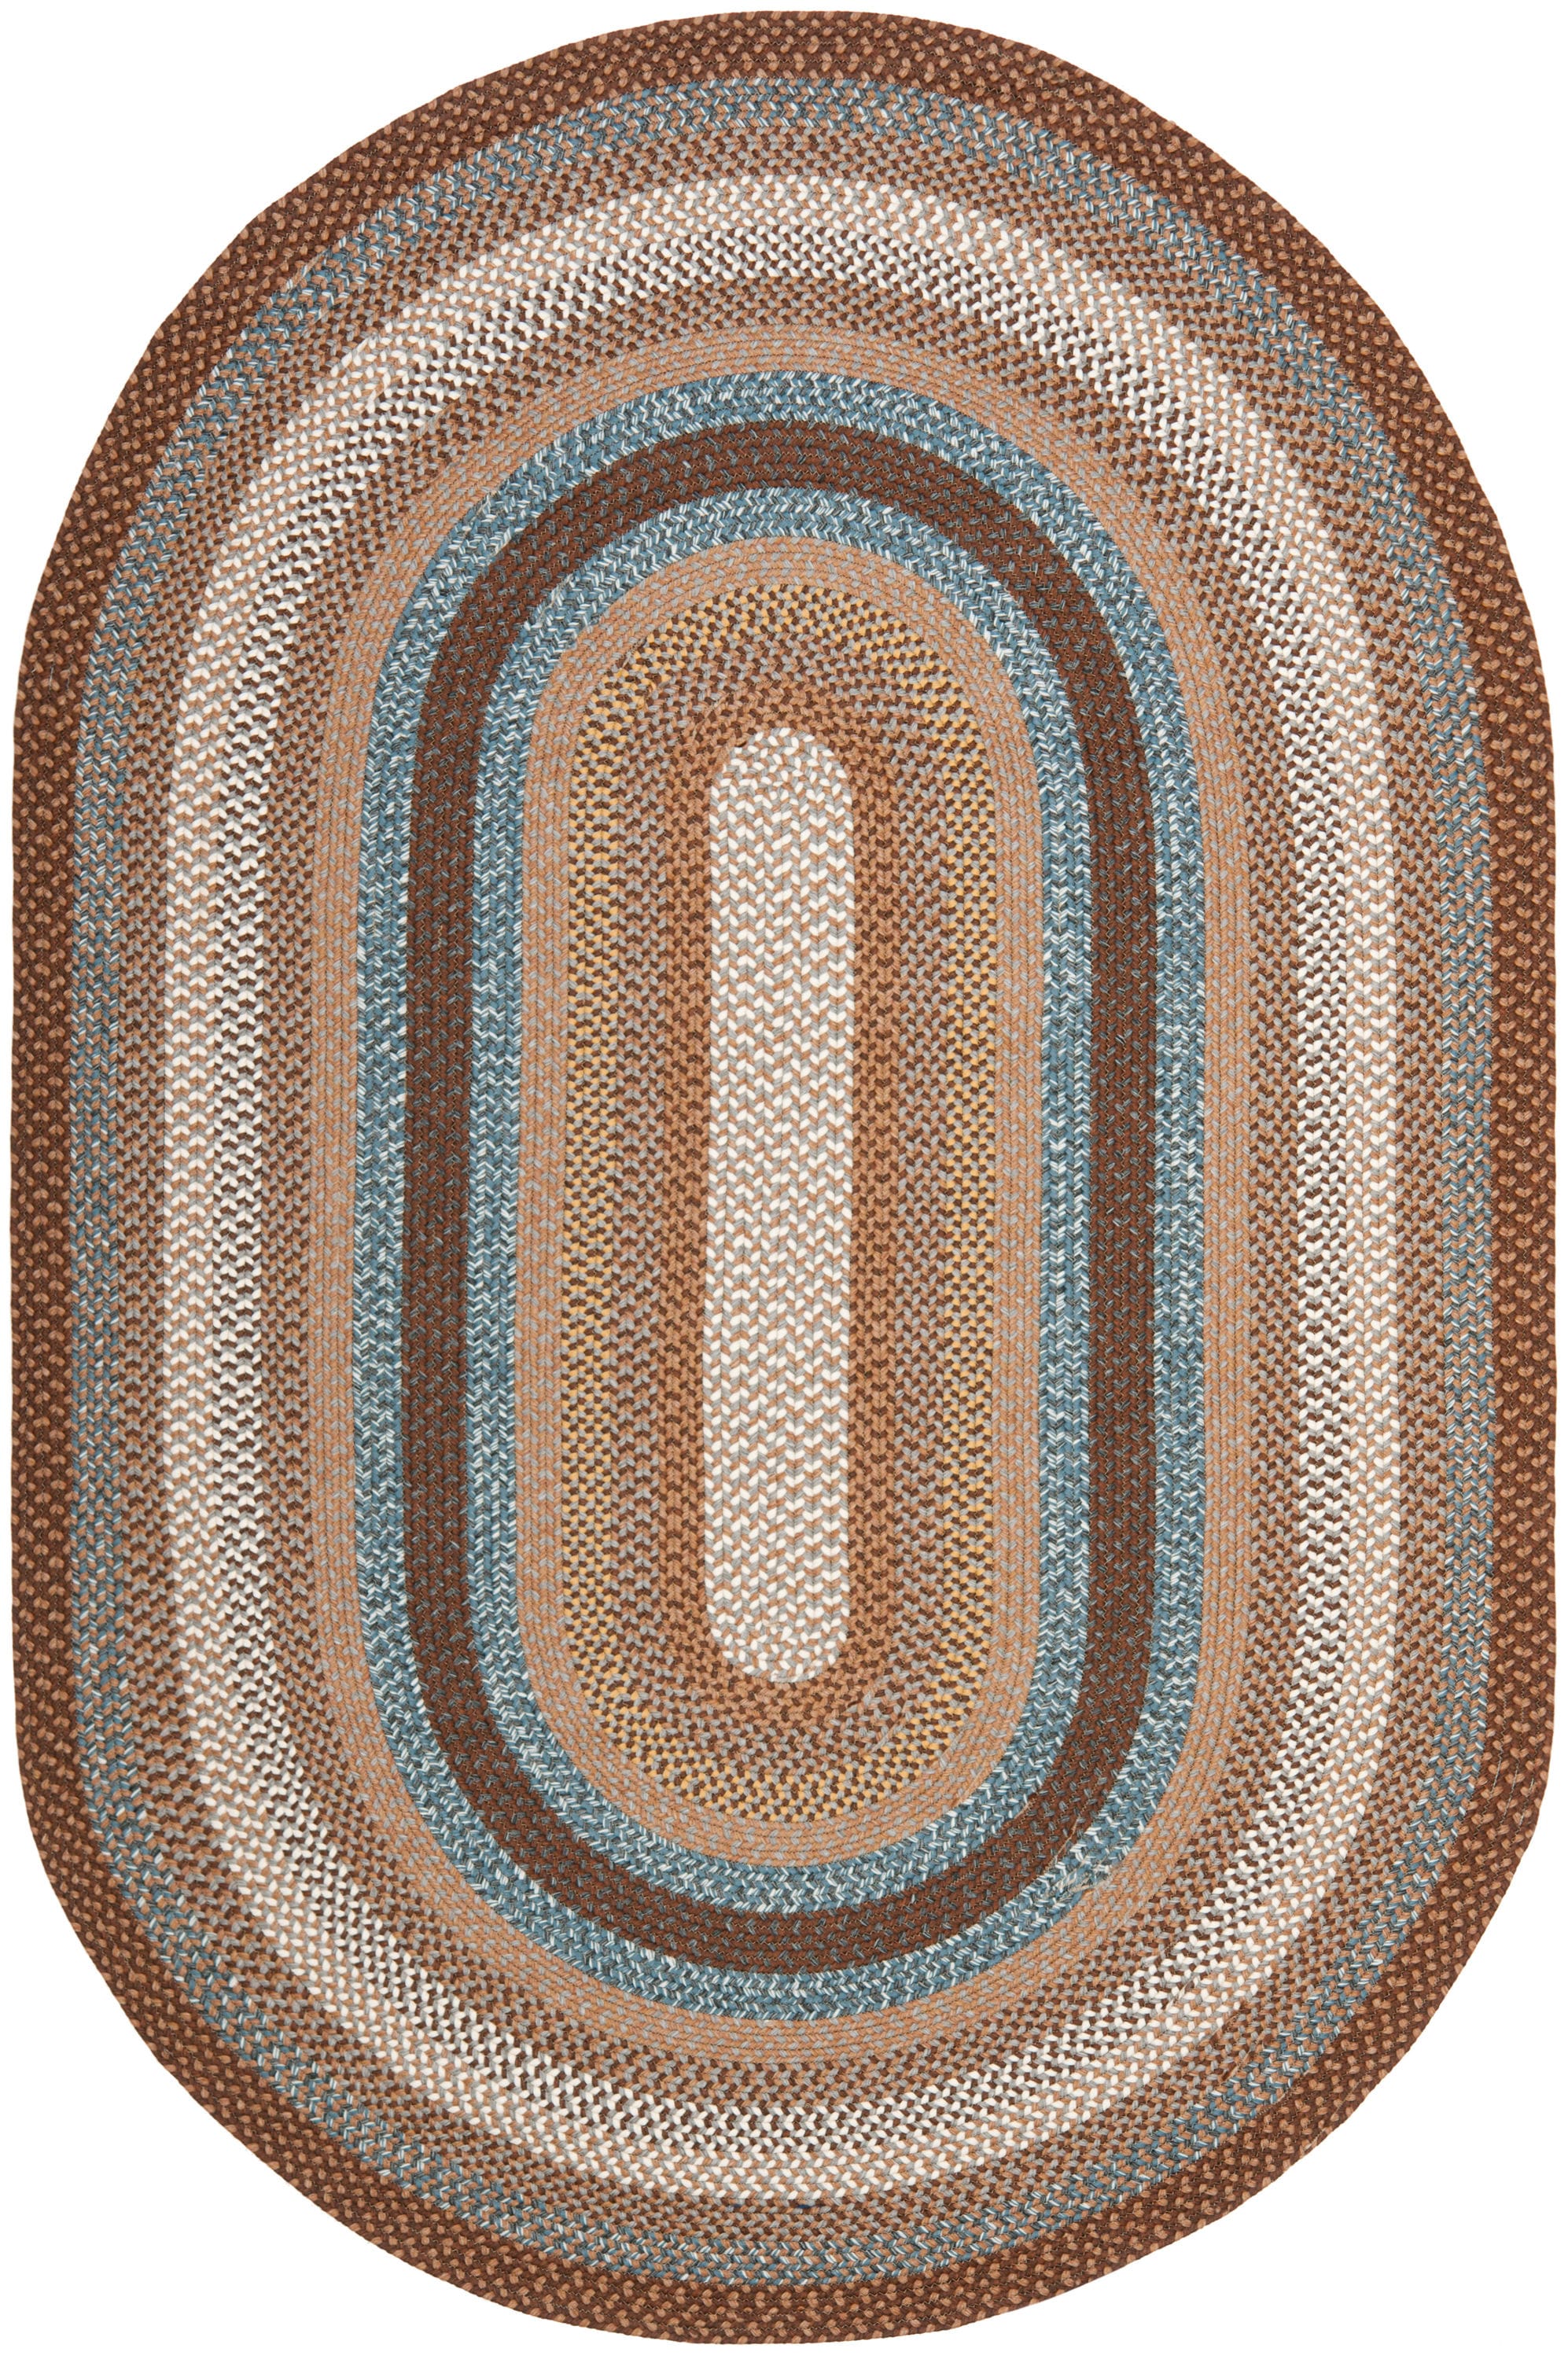 Texturized Solid Lt. Brown Poly 8 ft. x 11 ft. Oval Braided Area Rug  TS25R096X132 - The Home Depot